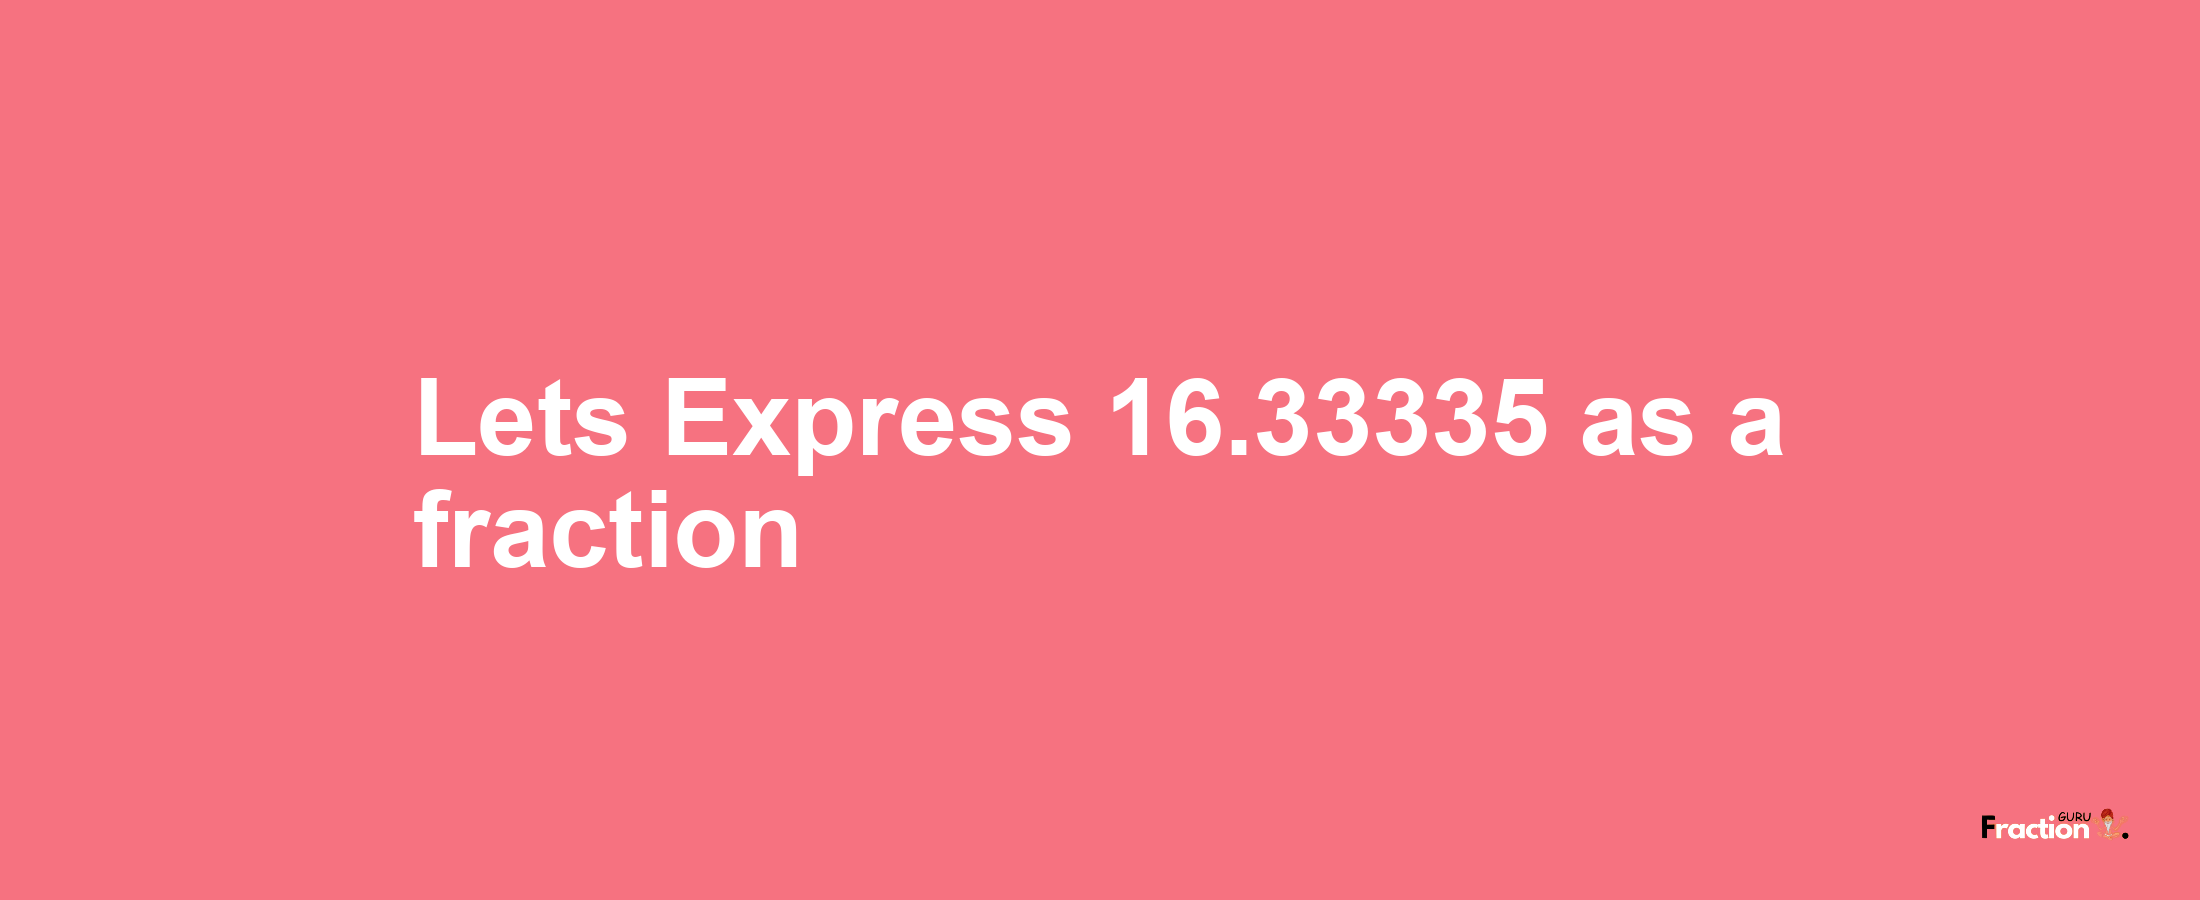 Lets Express 16.33335 as afraction